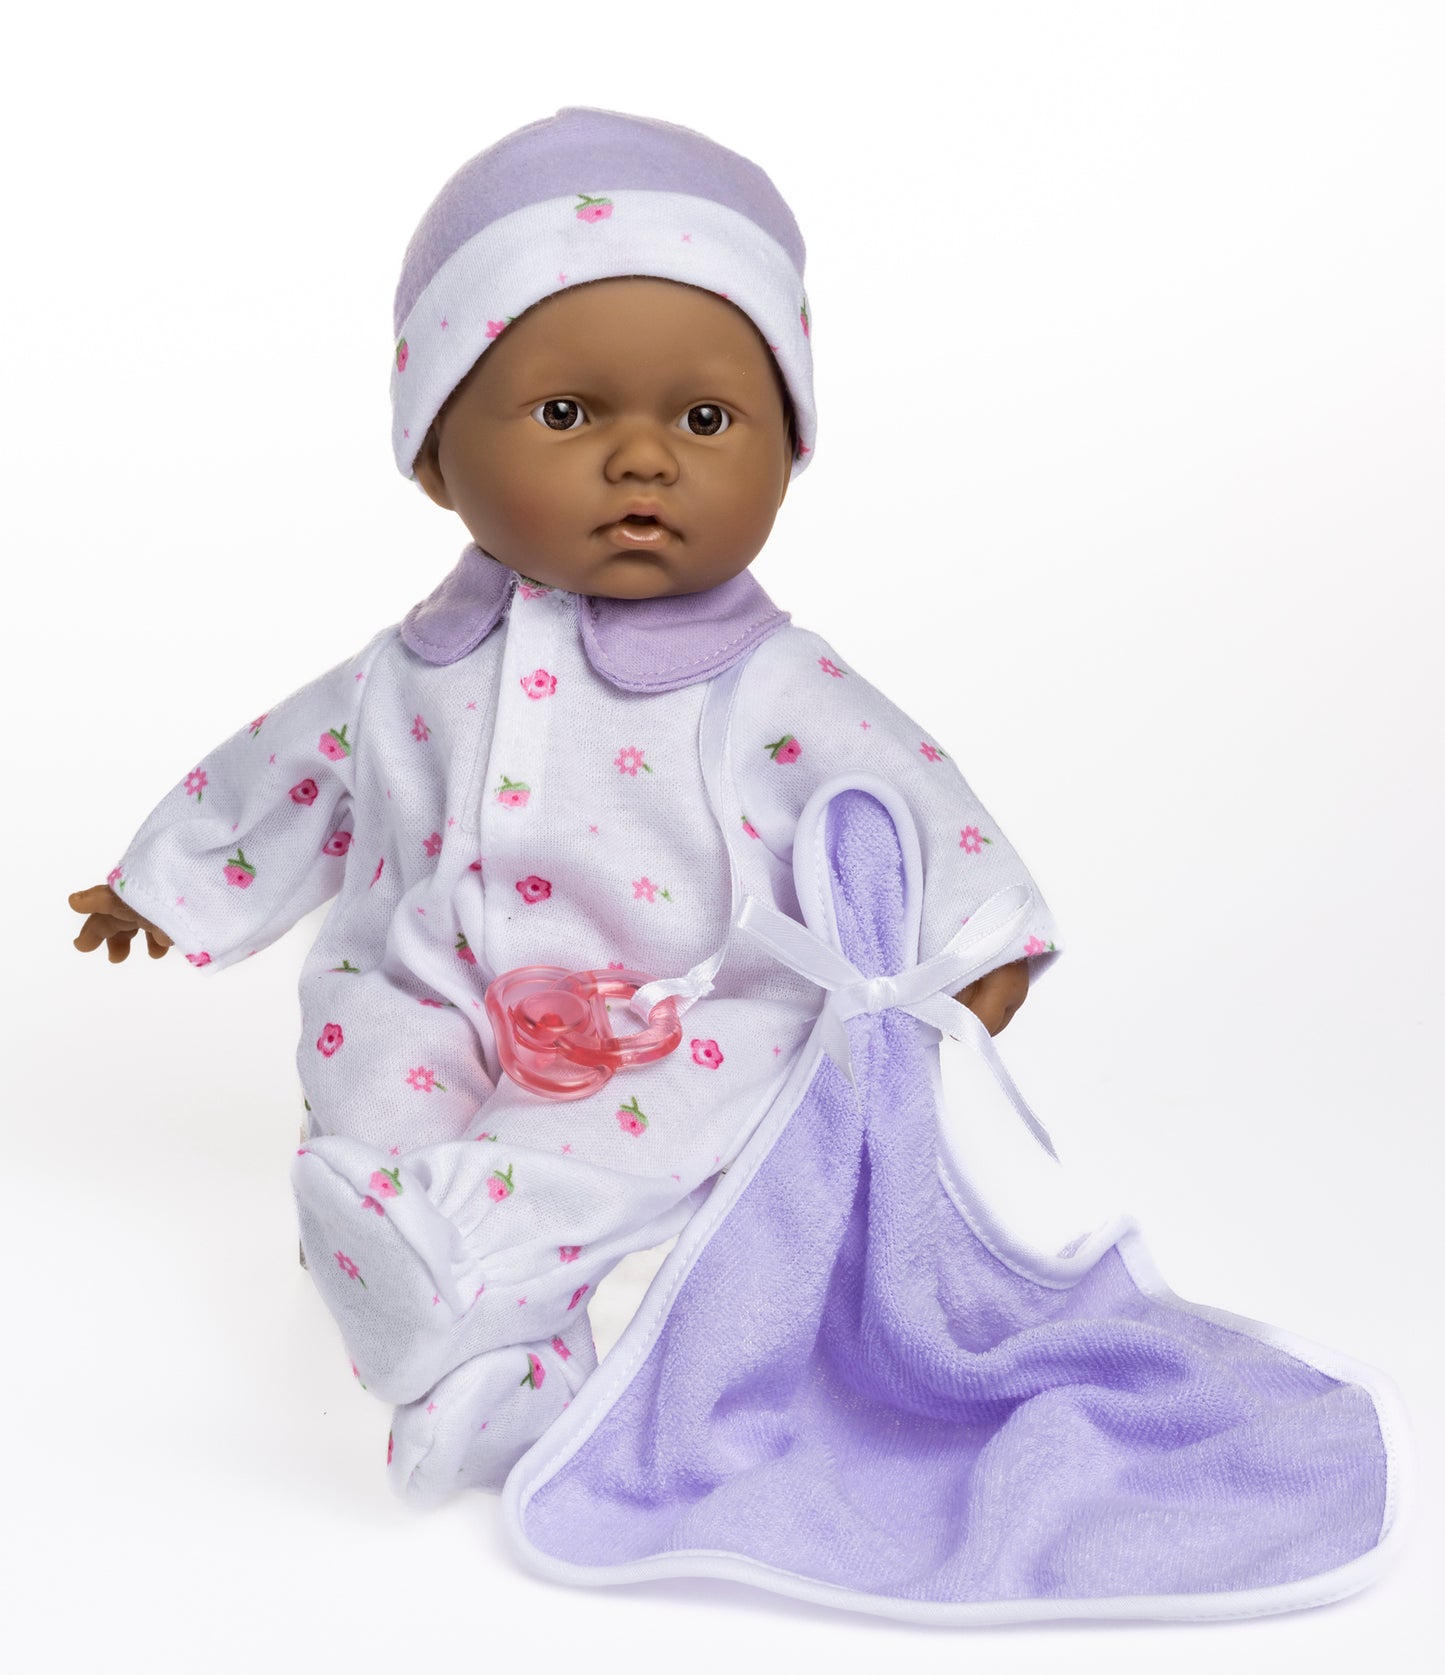 JC Toys, La Baby 11 inch Soft Body Hispanic Baby Doll in Purple Outfit